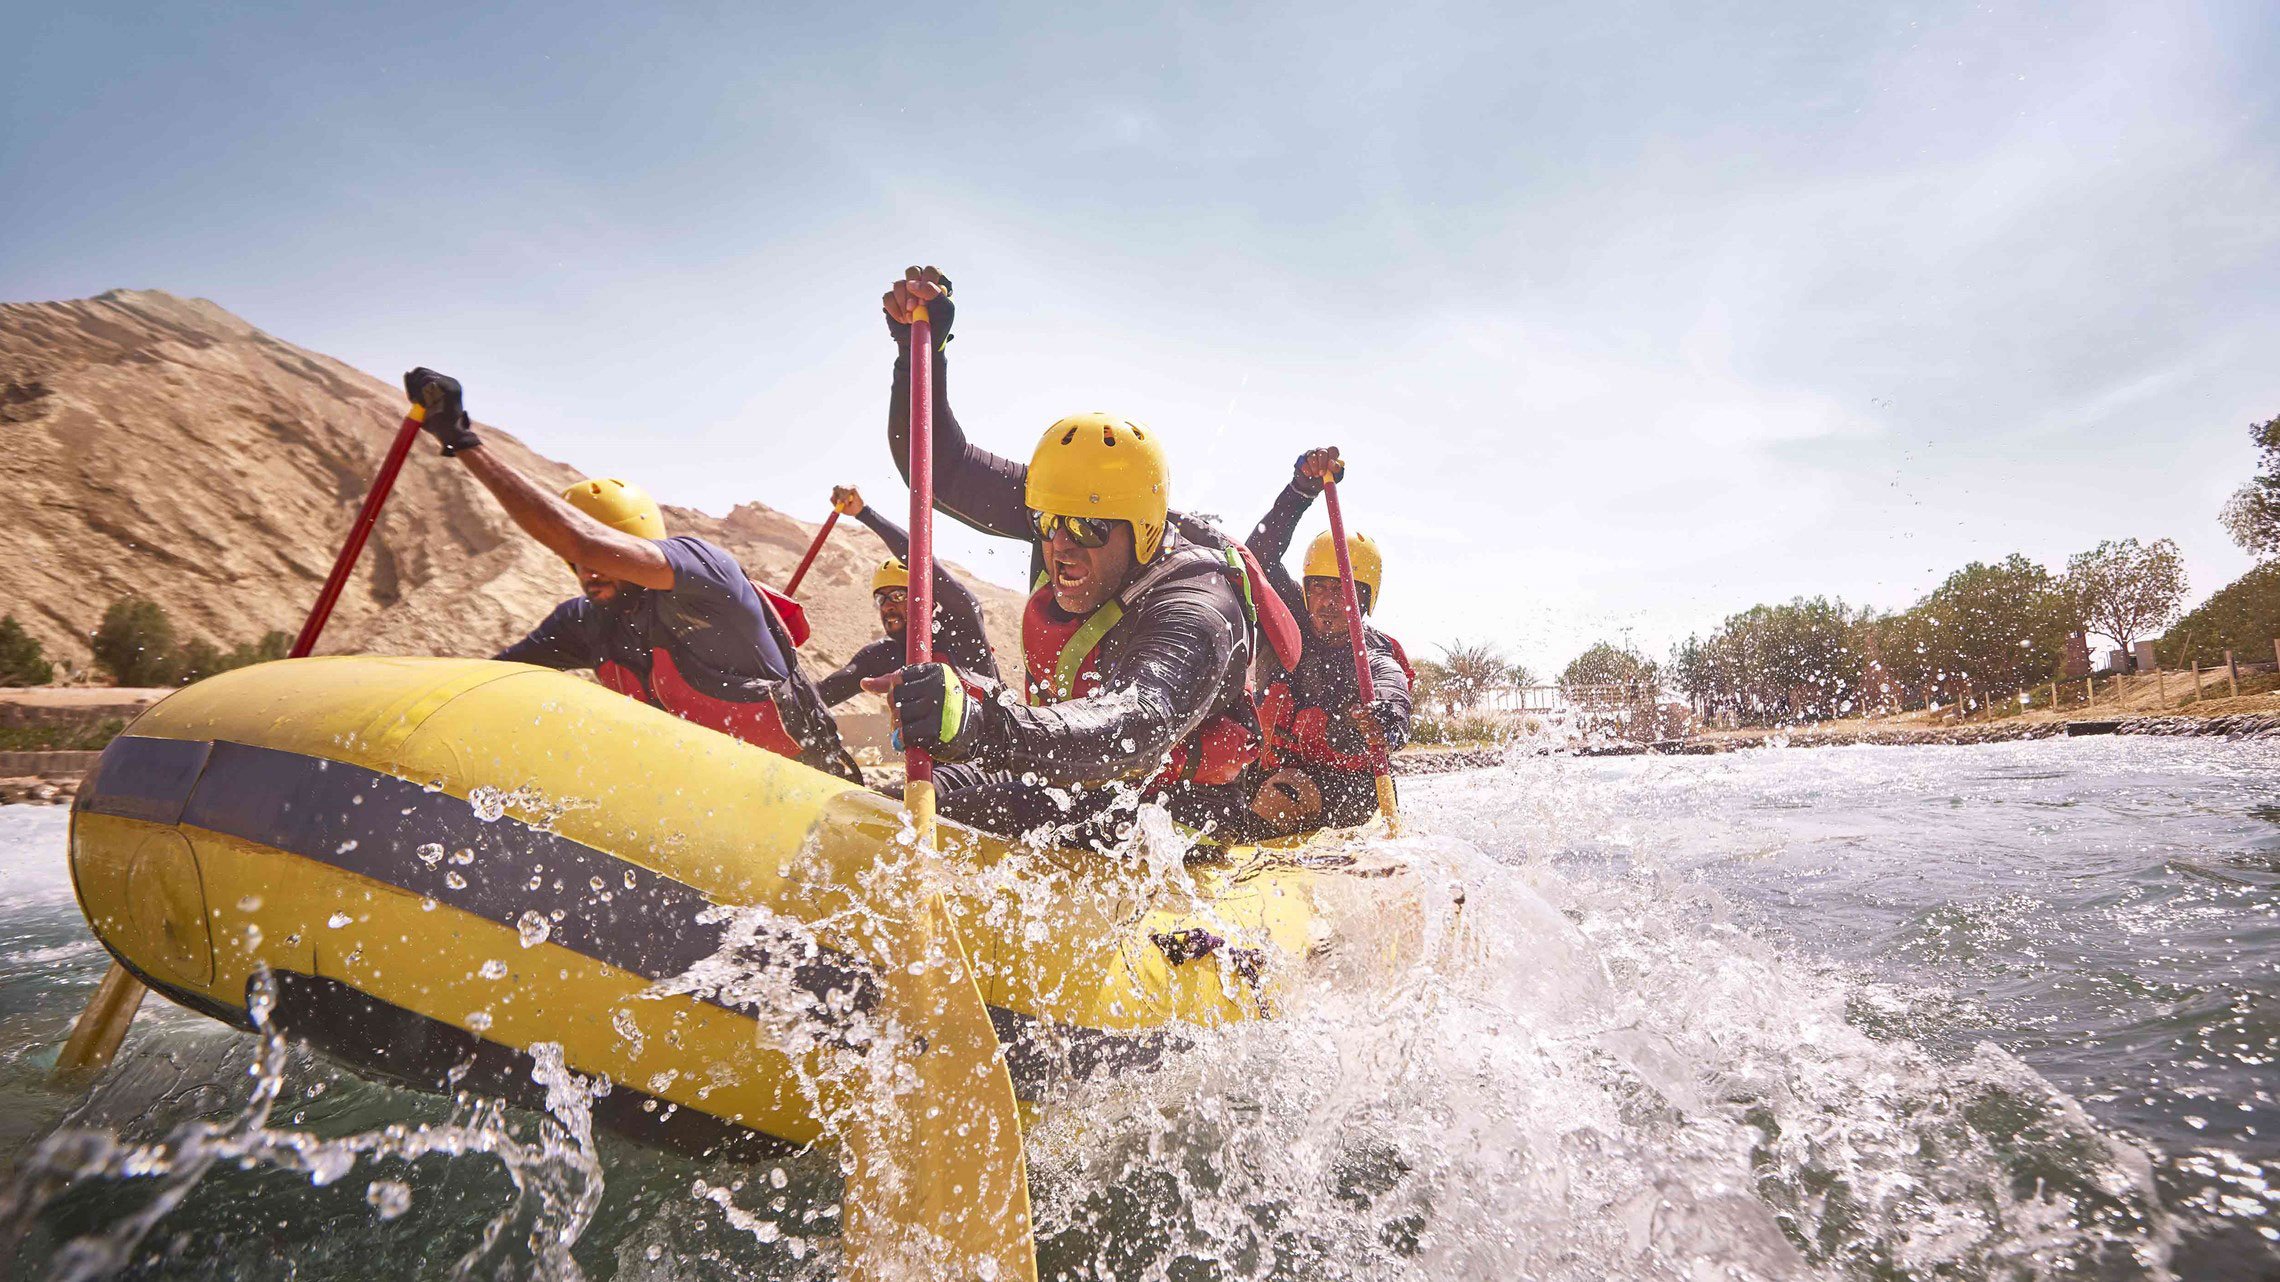 7. Speed down man-made white water rafting channels